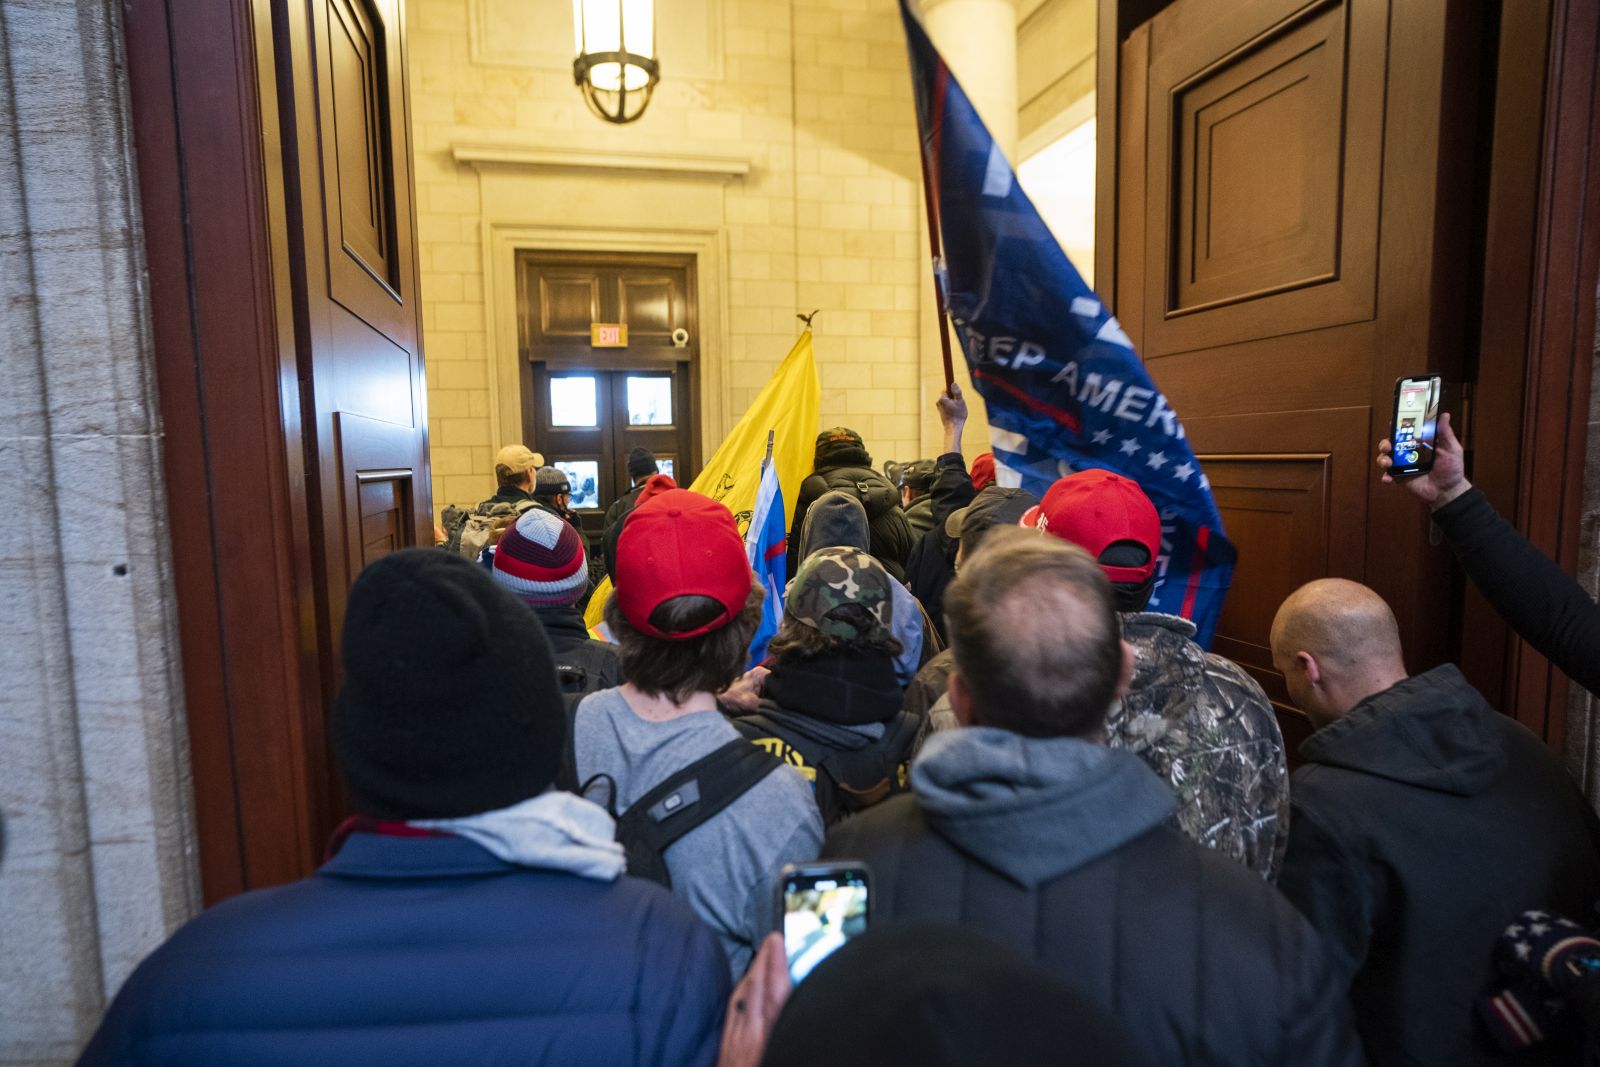 epa09664283 (12/24) (FILE) - Supporters of US President Trump stand by the door of the Eastern front after they breached the US Capitol security in Washington, DC, USA, 06 January 2021 (reissued 03 January 2021). Following the November 2020 US presidential election, a tone set by supporters of defeated US President Donald Trump escalated further. Trump, who was refusing to concede the victory of Joe Biden, claiming voter fraud and rigged elections, told supporters and white nationalist extreme-right group Proud Boys to respectively 'Stop the Steal' and to 'stand back and stand by'. His social media accounts were suspended and the alt-right platform Parler gained in user numbers. 
 
On 06 January 2021, incumbent US vice president Pence was due to certify the Electoral College votes before Congress, the last step in the process before President-elect Biden was to be sworn in. In the morning, pro-Trump protesters had gathered for the so-called Save America March. Soon after Trump finished his speech at the Ellipse, the crowd marched to the Capitol. The attack had begun. 
 
Rioters broke into the Capitol building where the joint Congress session was being held. Lawmakers barricaded themselves inside the chambers and donned tear gas masks while rioters vandalized the building, some even occupying offices such as House Speaker Pelosi's. Eventually in the evening the building was cleared from insurrectionists, and the Congress chambers reconvened their session, confirming Joe Biden as the winner of the 2020 US presidential election. 

In the aftermath, more than 600 people were charged with federal crimes in connection to the insurgency, and close Trump aides such as Steve Bannon, Mark Meadows and Roger Stone were subpoenaed by the House select committee investigating the attack. Trump himself was acquitted by the Senate in his second impeachment trial, this time for "inciting an insurrection".  EPA/JIM LO SCALZO  ATTENTION: This Image is part of a PHOTO SET *** Local